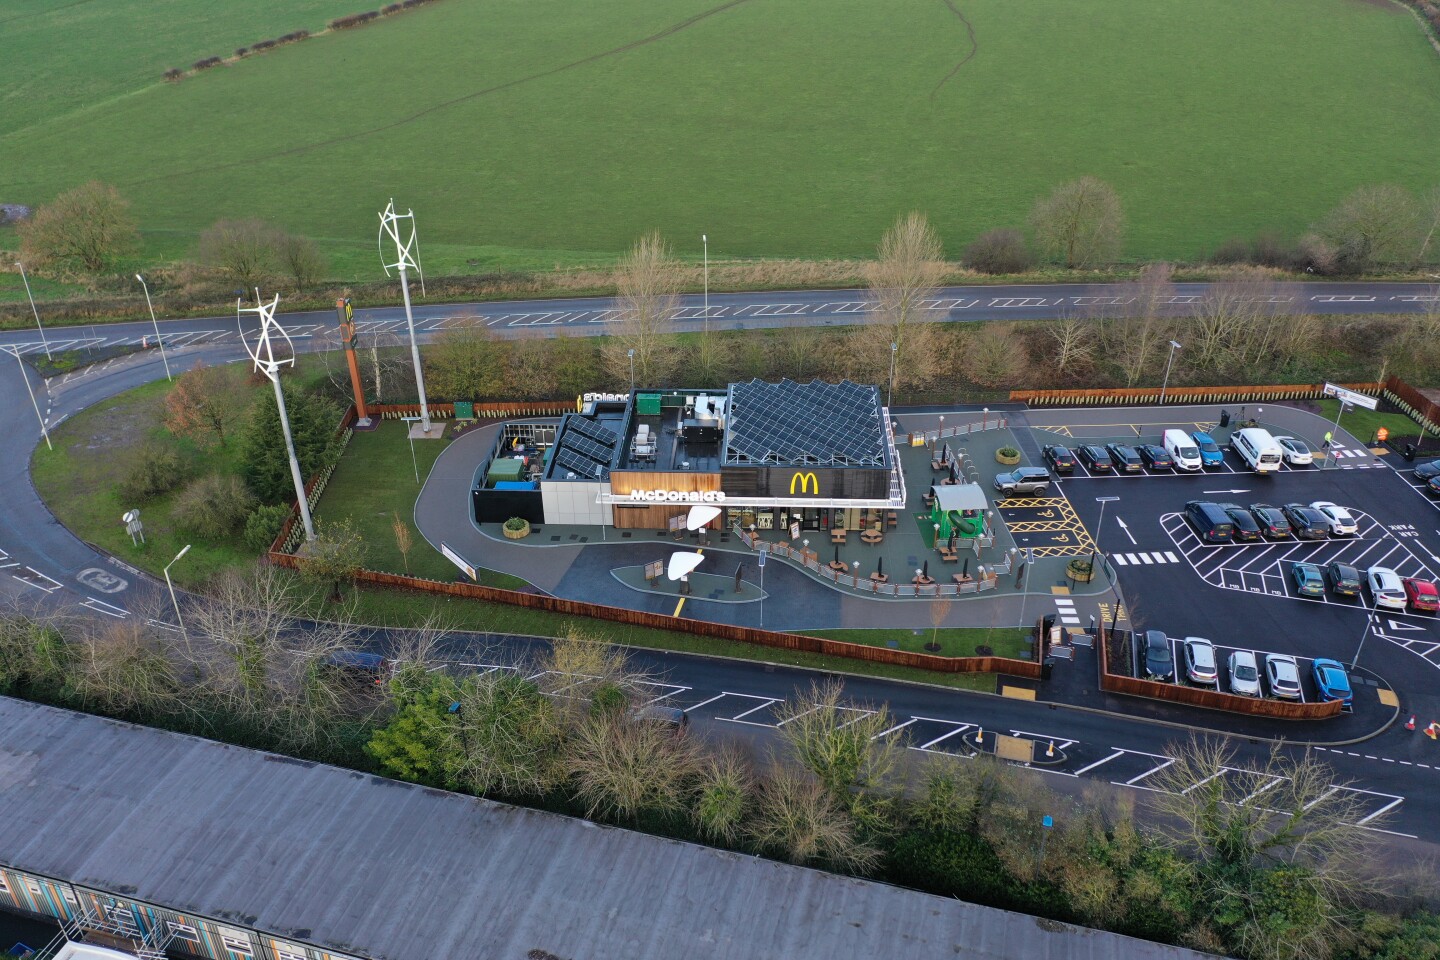 Market Drayton McDonald's features solar panels and wind turbines, which generate 60,000 kWh of energy annually